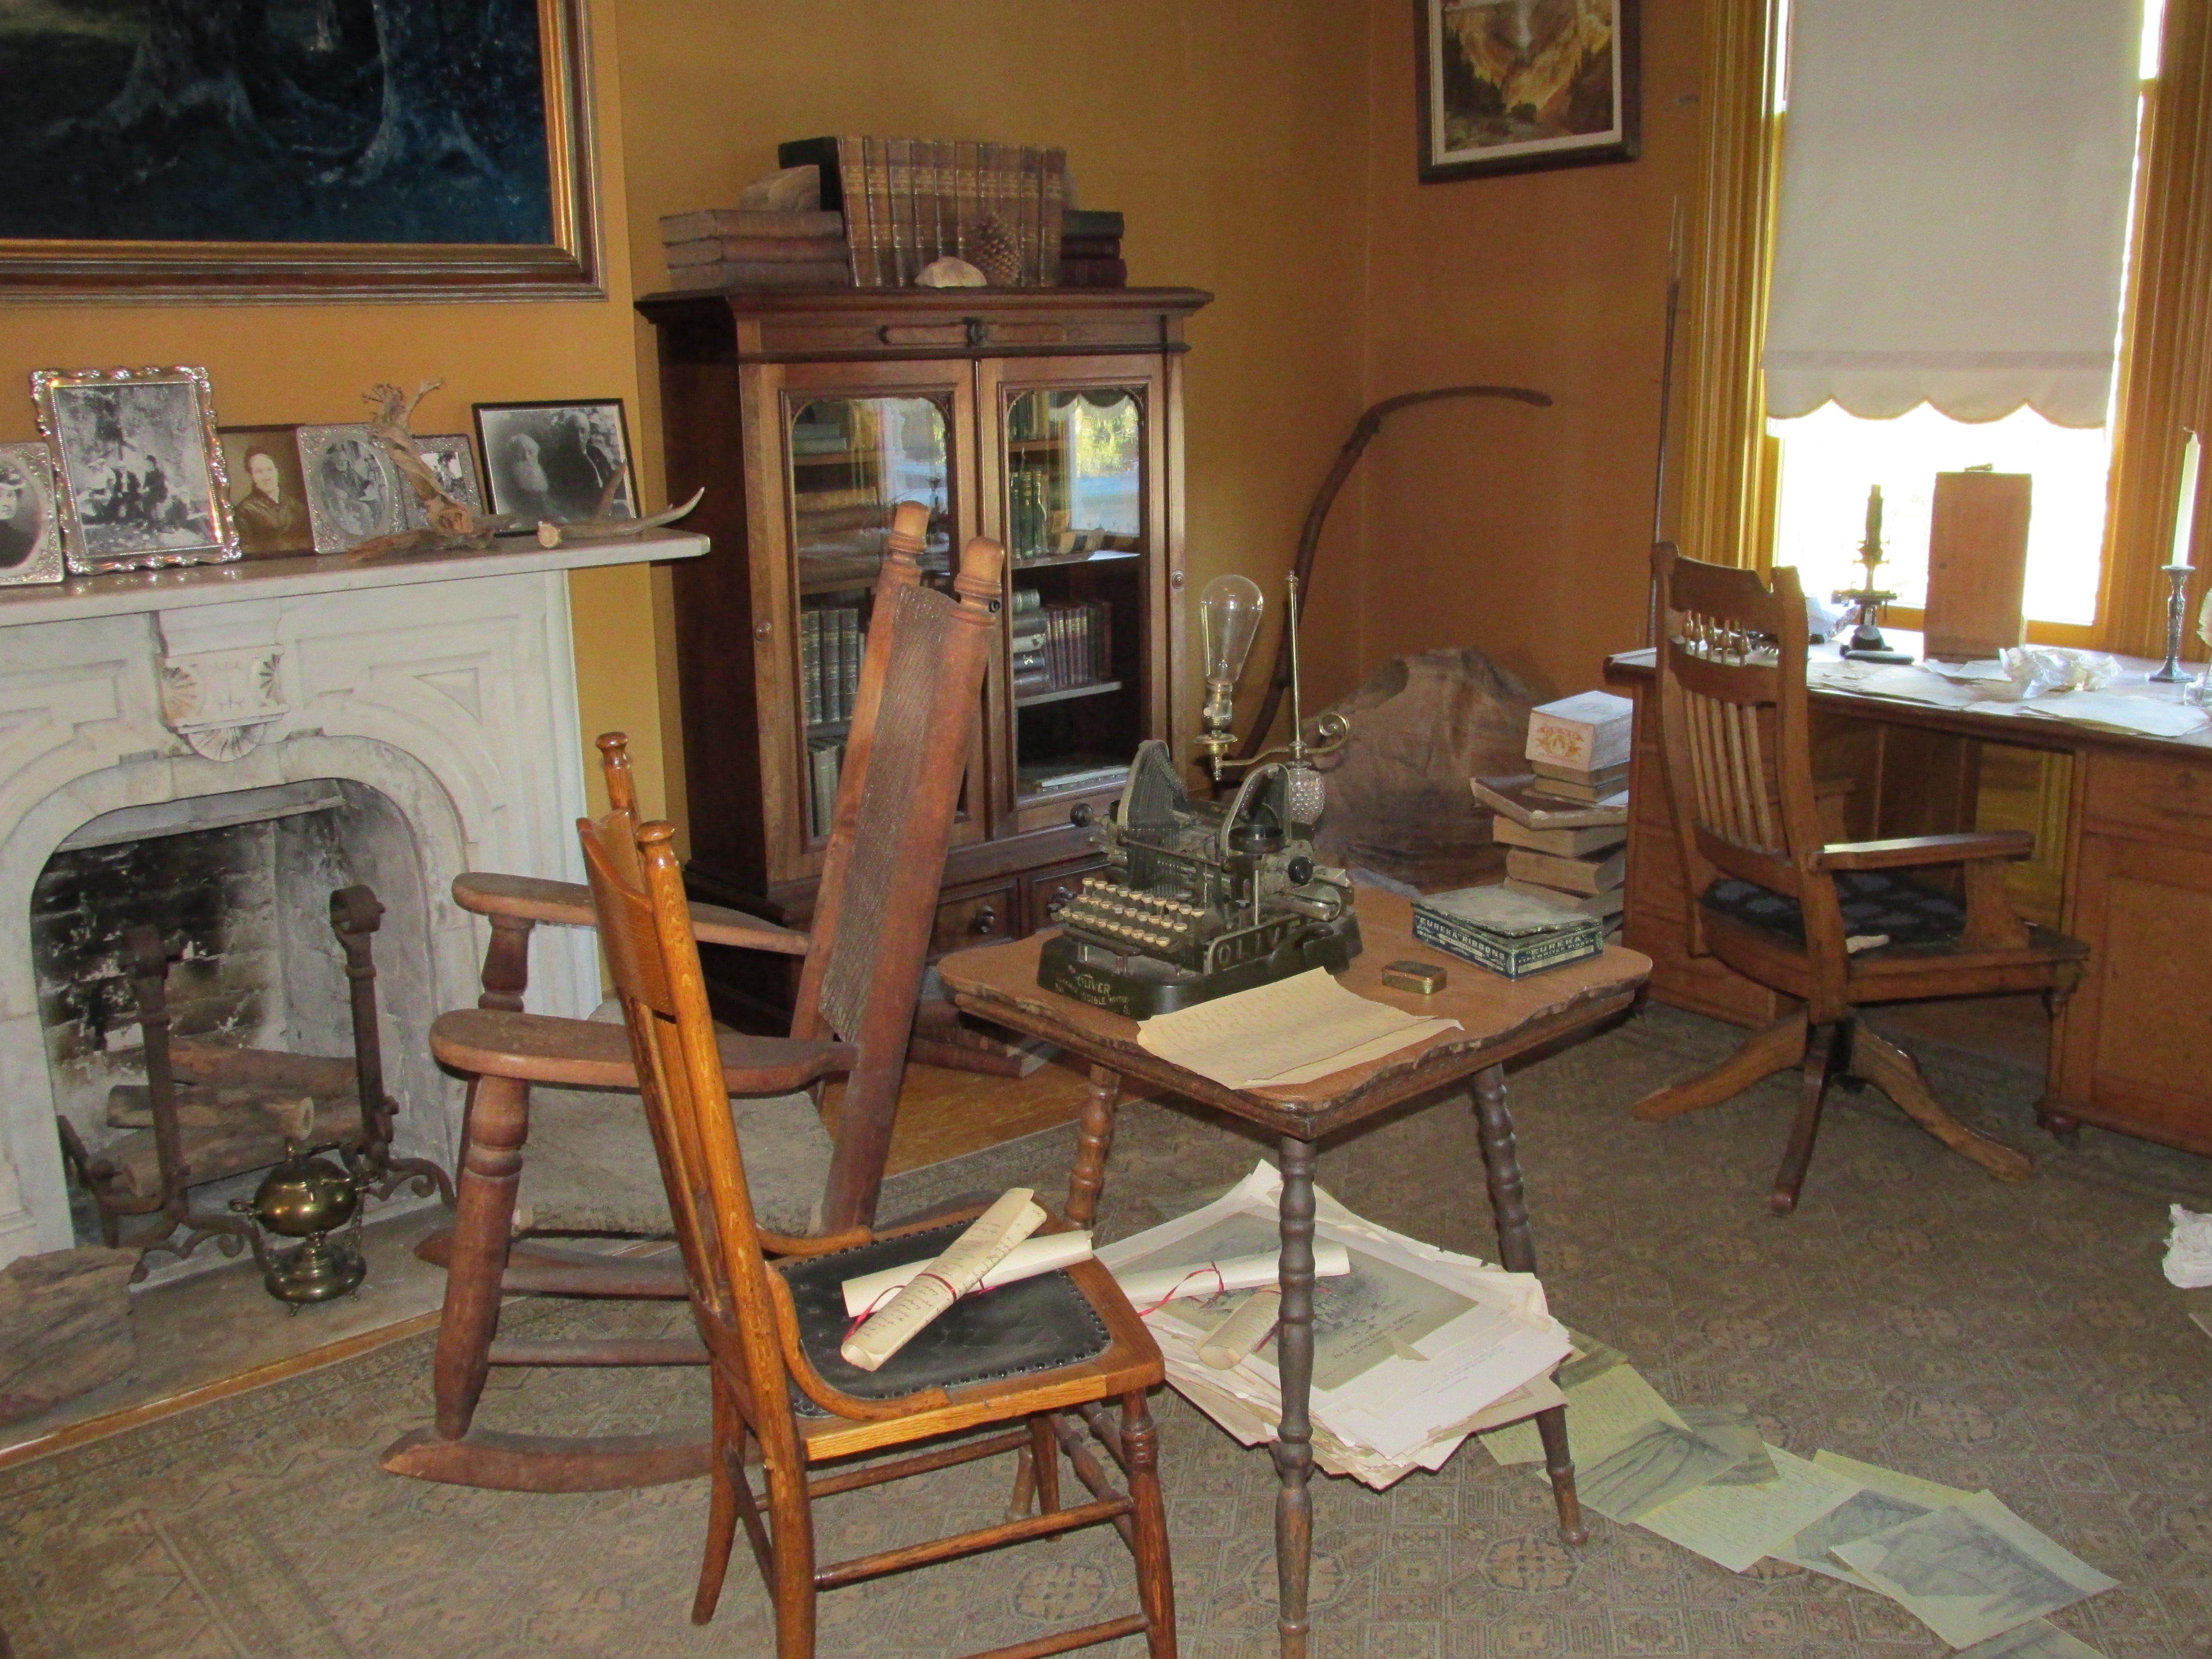 John Muir's "scribble den" where he wrote many of the books that inspired the environmental movement. (Ortega-Welch/KQED)